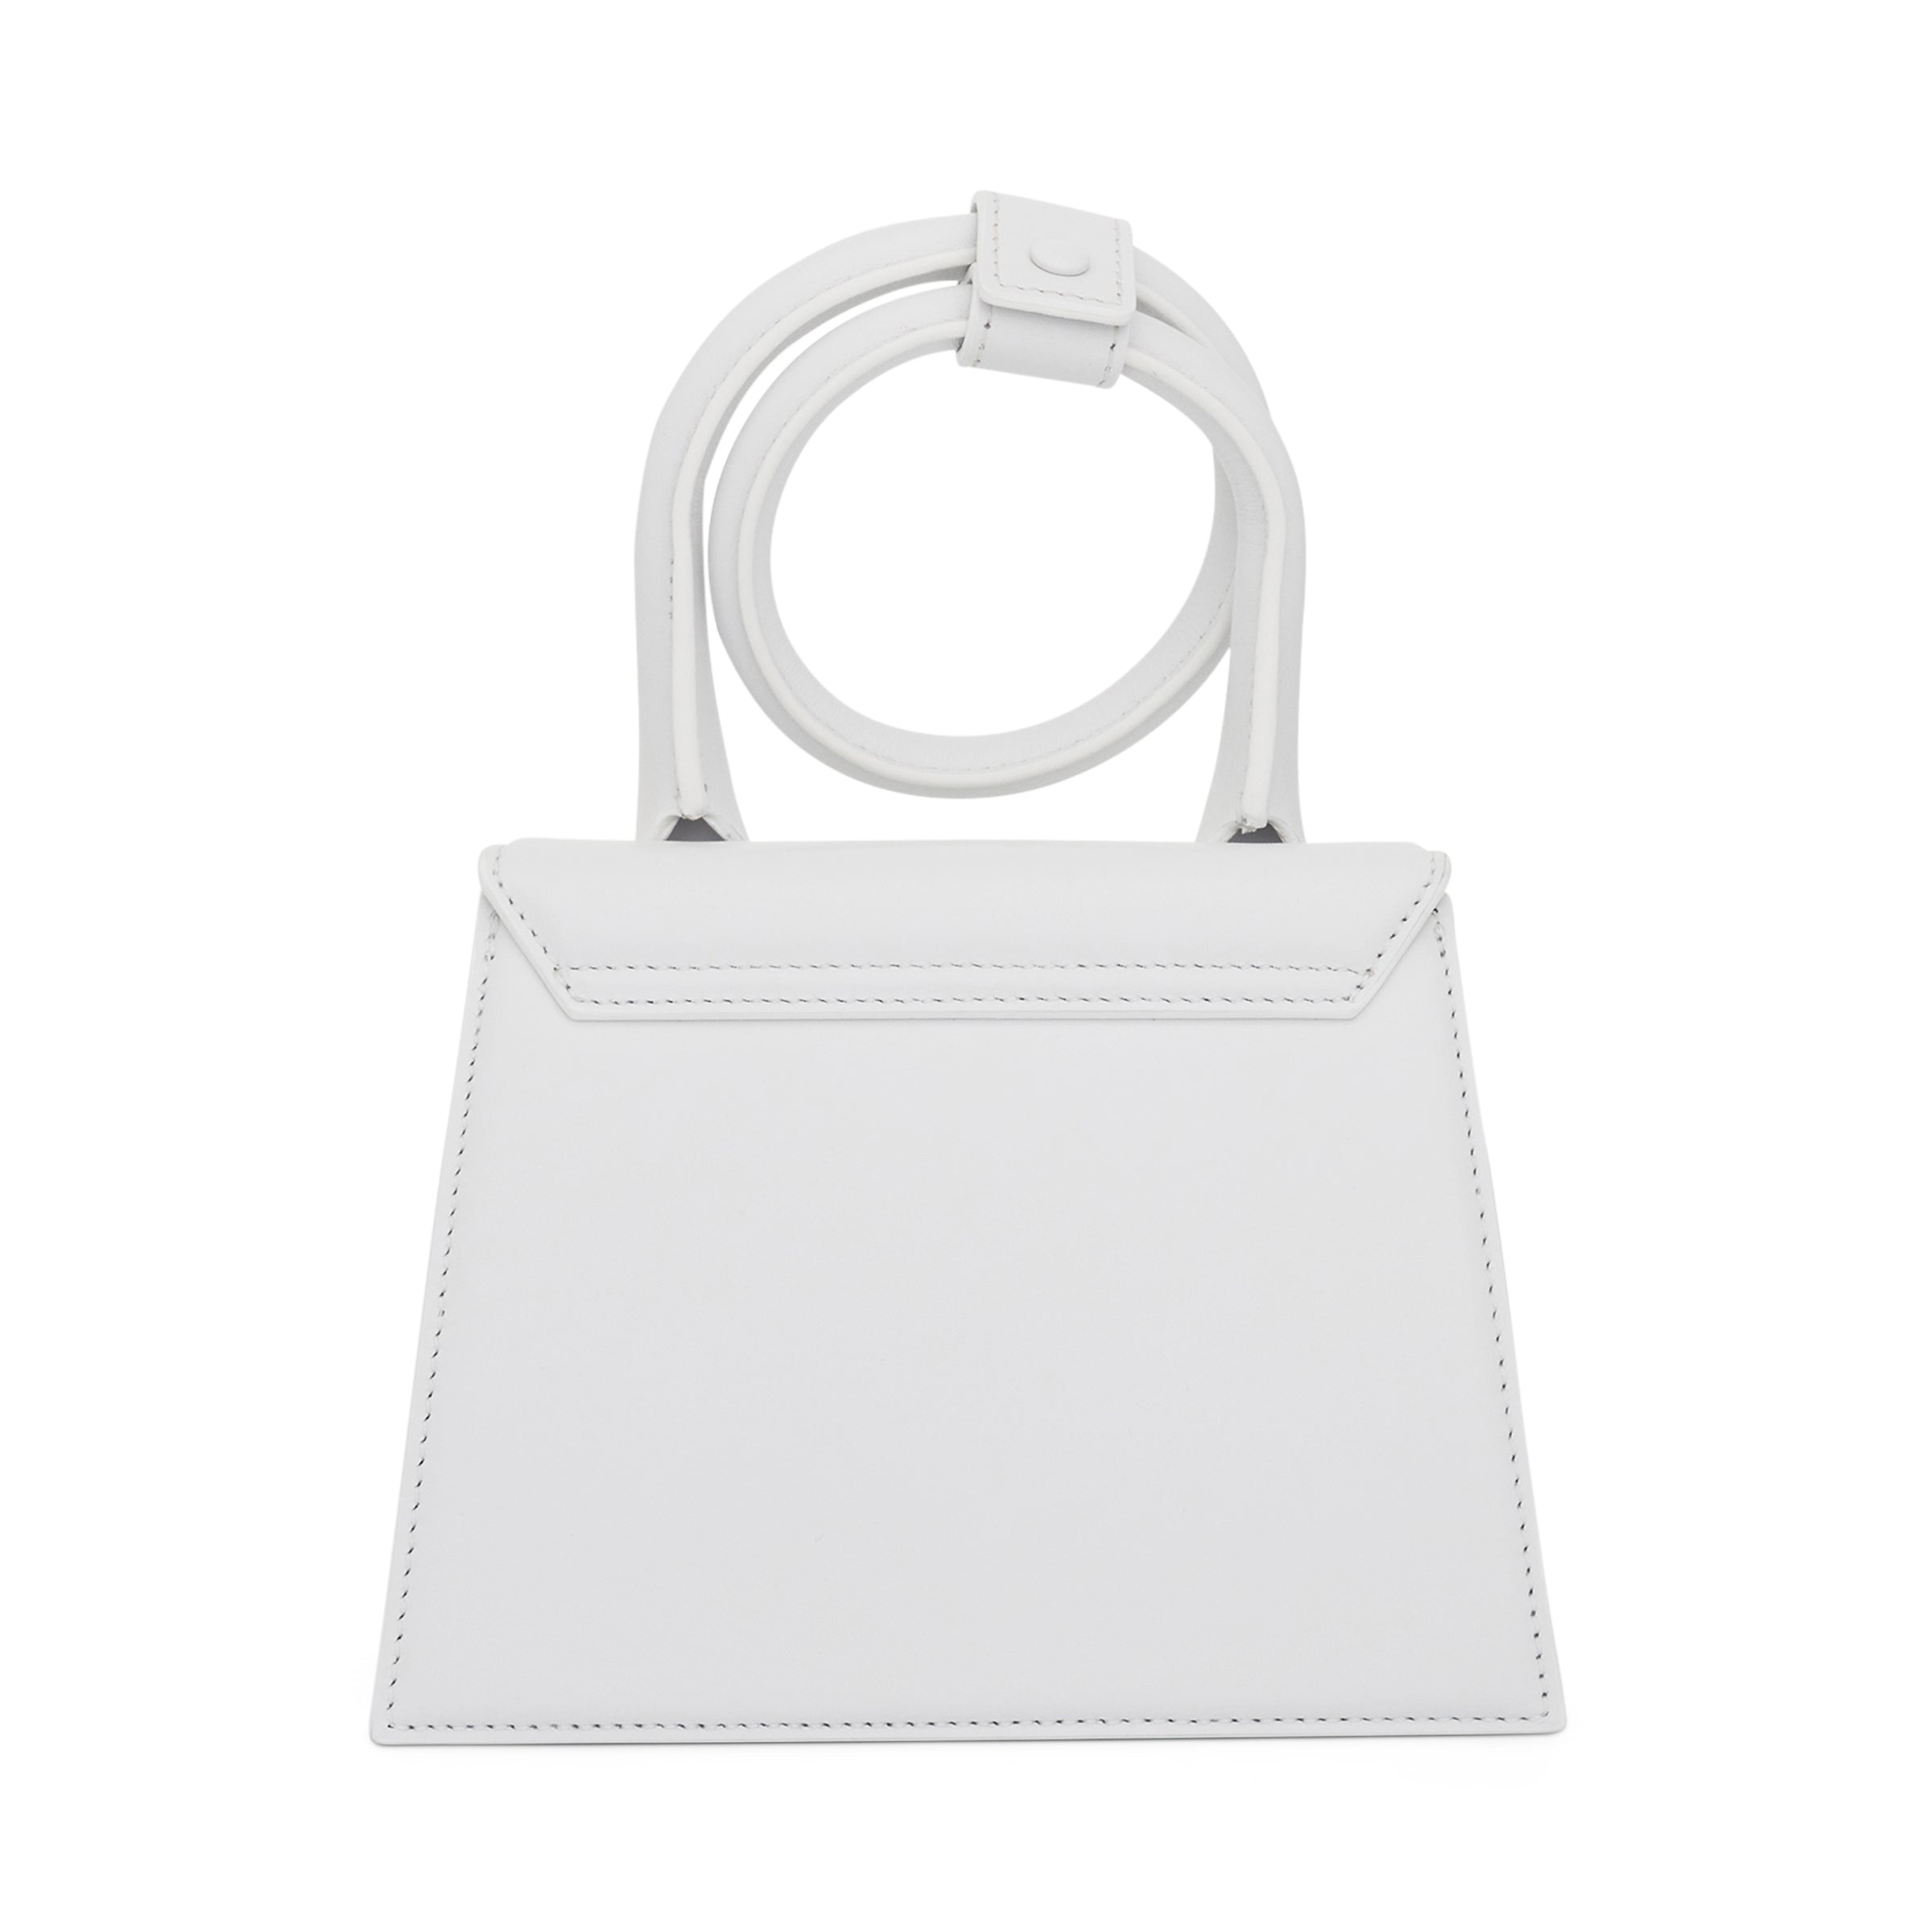 Le Chiquito Noeud Leather Bag in White - 3